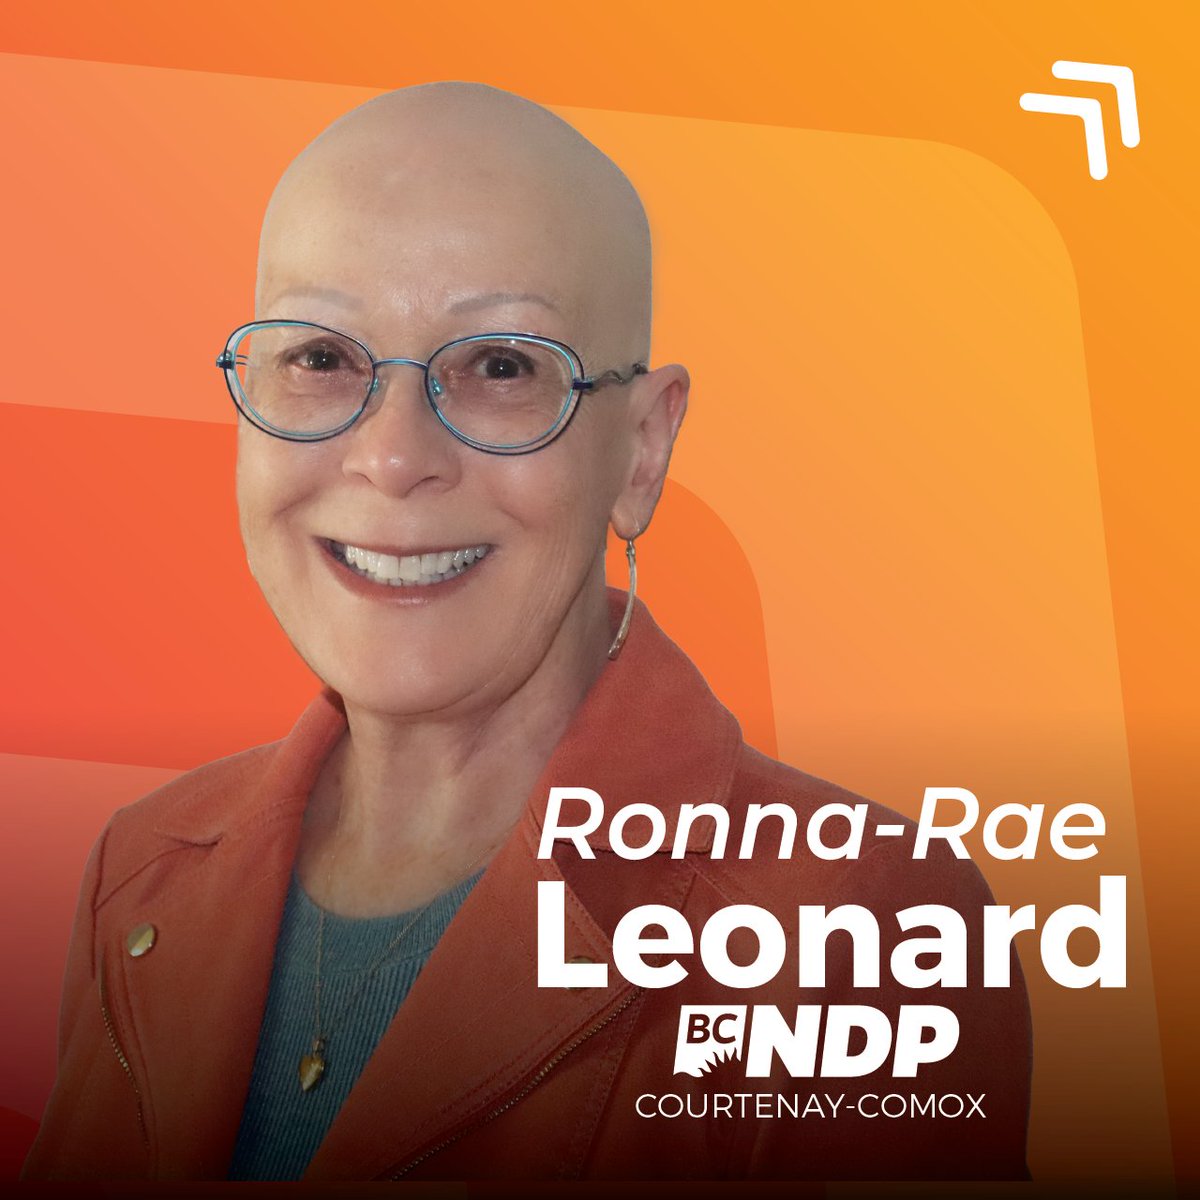 We’re excited to welcome Ronna-Rae Leonard to our team as the BC NDP candidate in Courtenay-Comox. Twice-elected as the MLA for Courtenay-Comox in 2017 and 2020, Ronna-Rae also served as a Courtenay city councillor for nine years. Congratulations, @RonnaRaeLeonard!